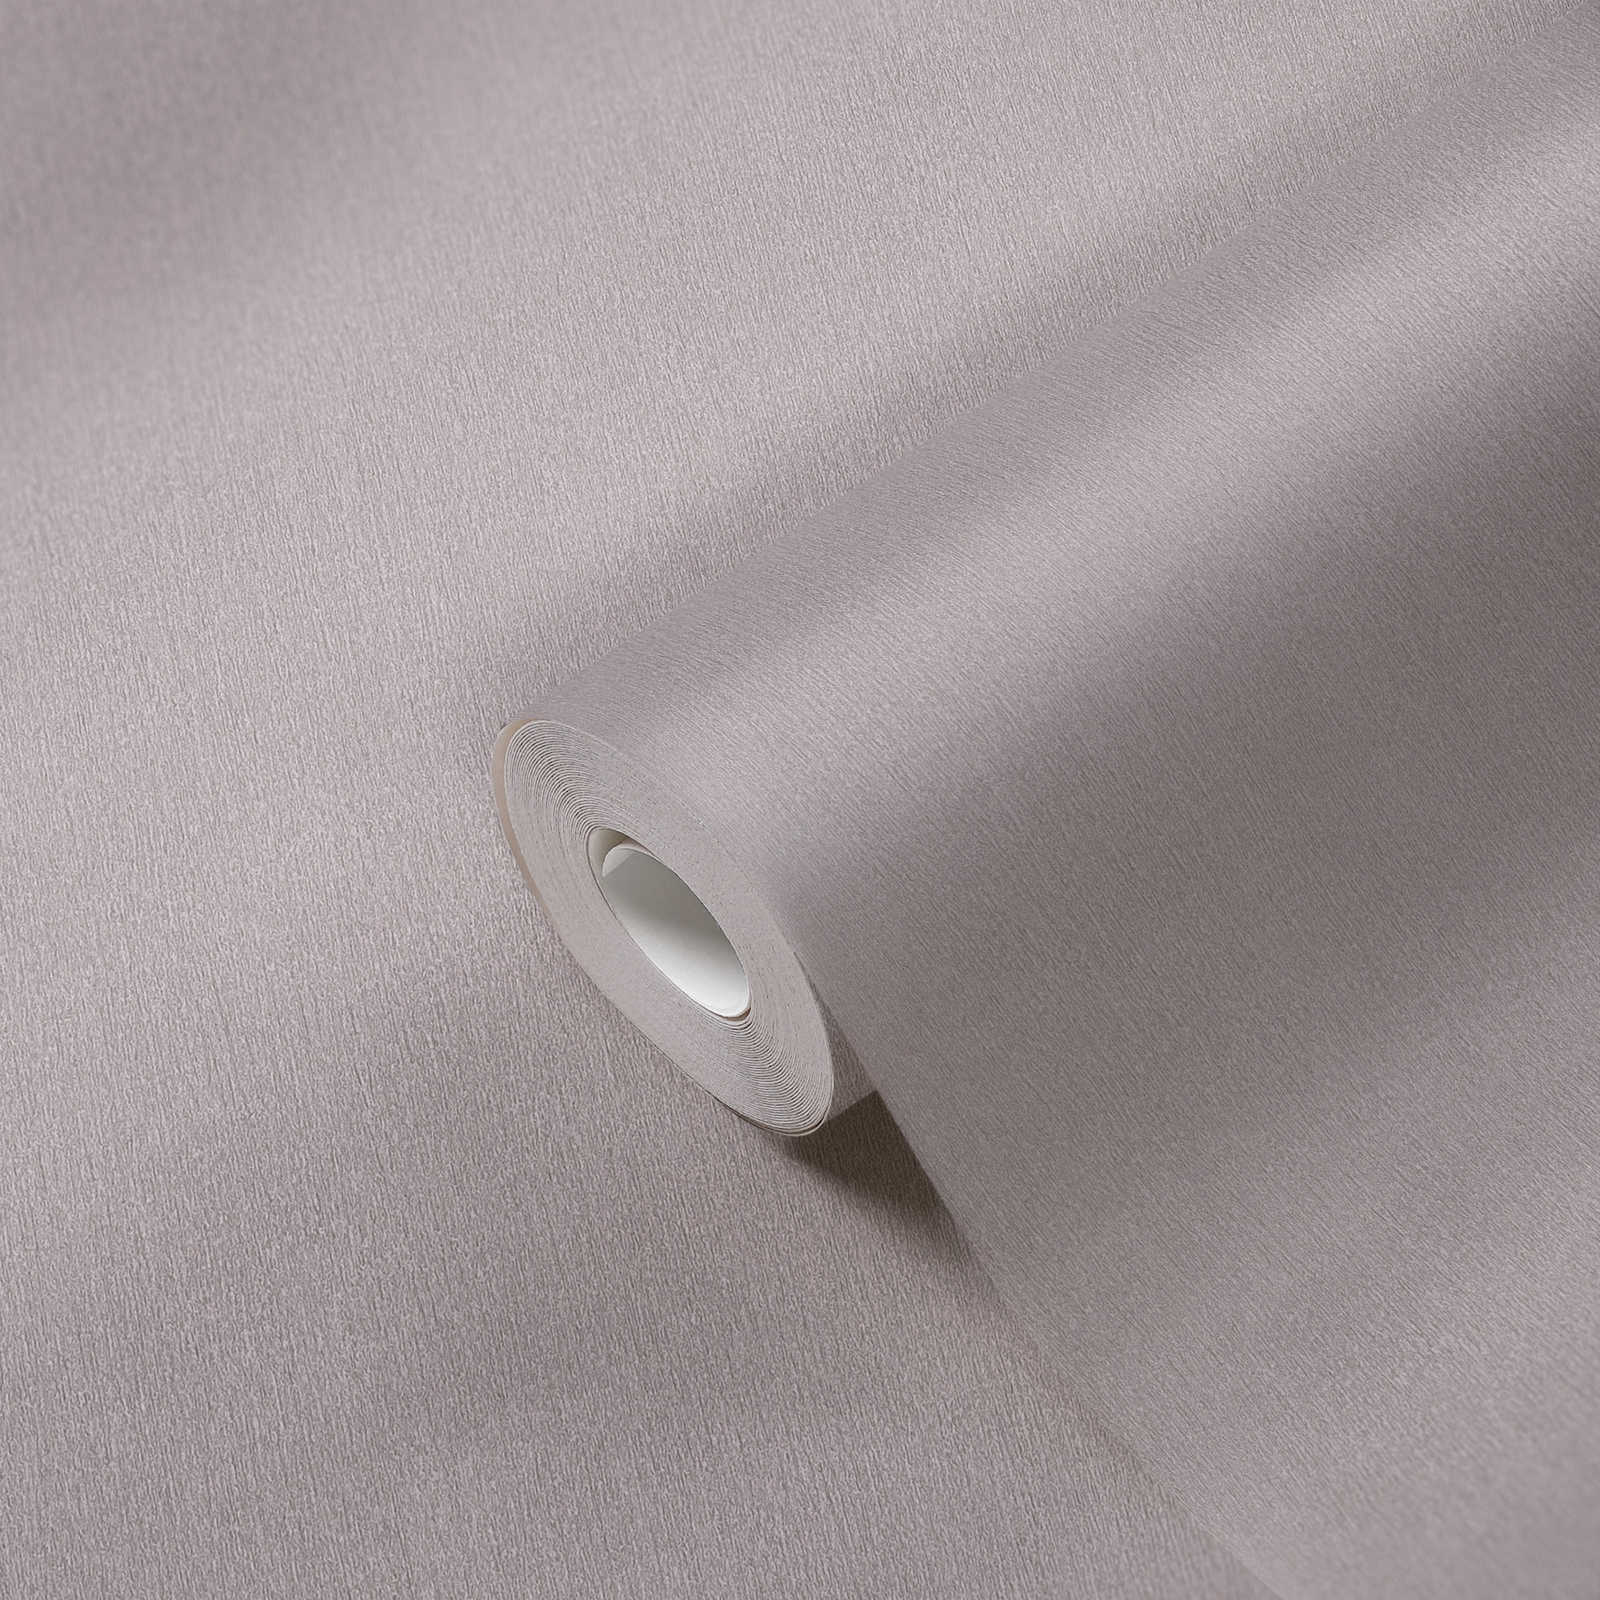             Plain wallpaper grey with colour hatching, smooth non-woven
        